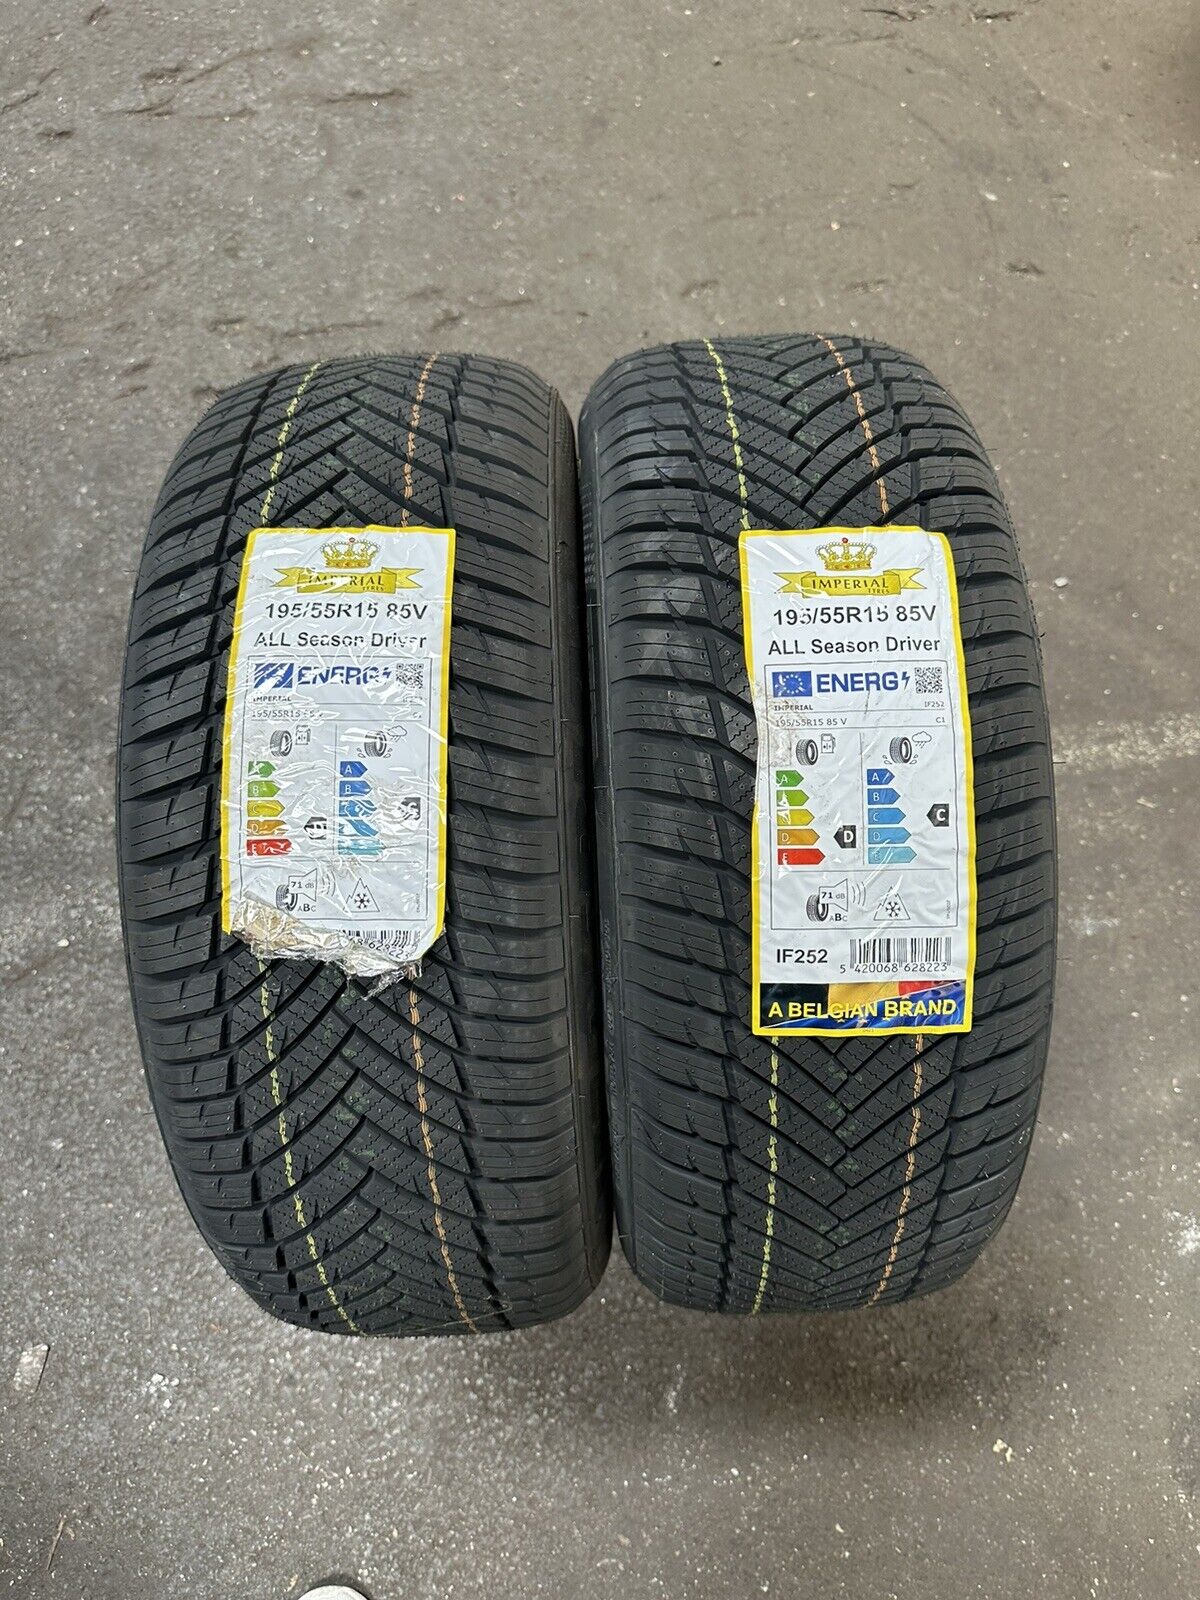 2x Imperial All Season Driver 195/55 R15 85V M+S DOT 1723 NEW Special offer